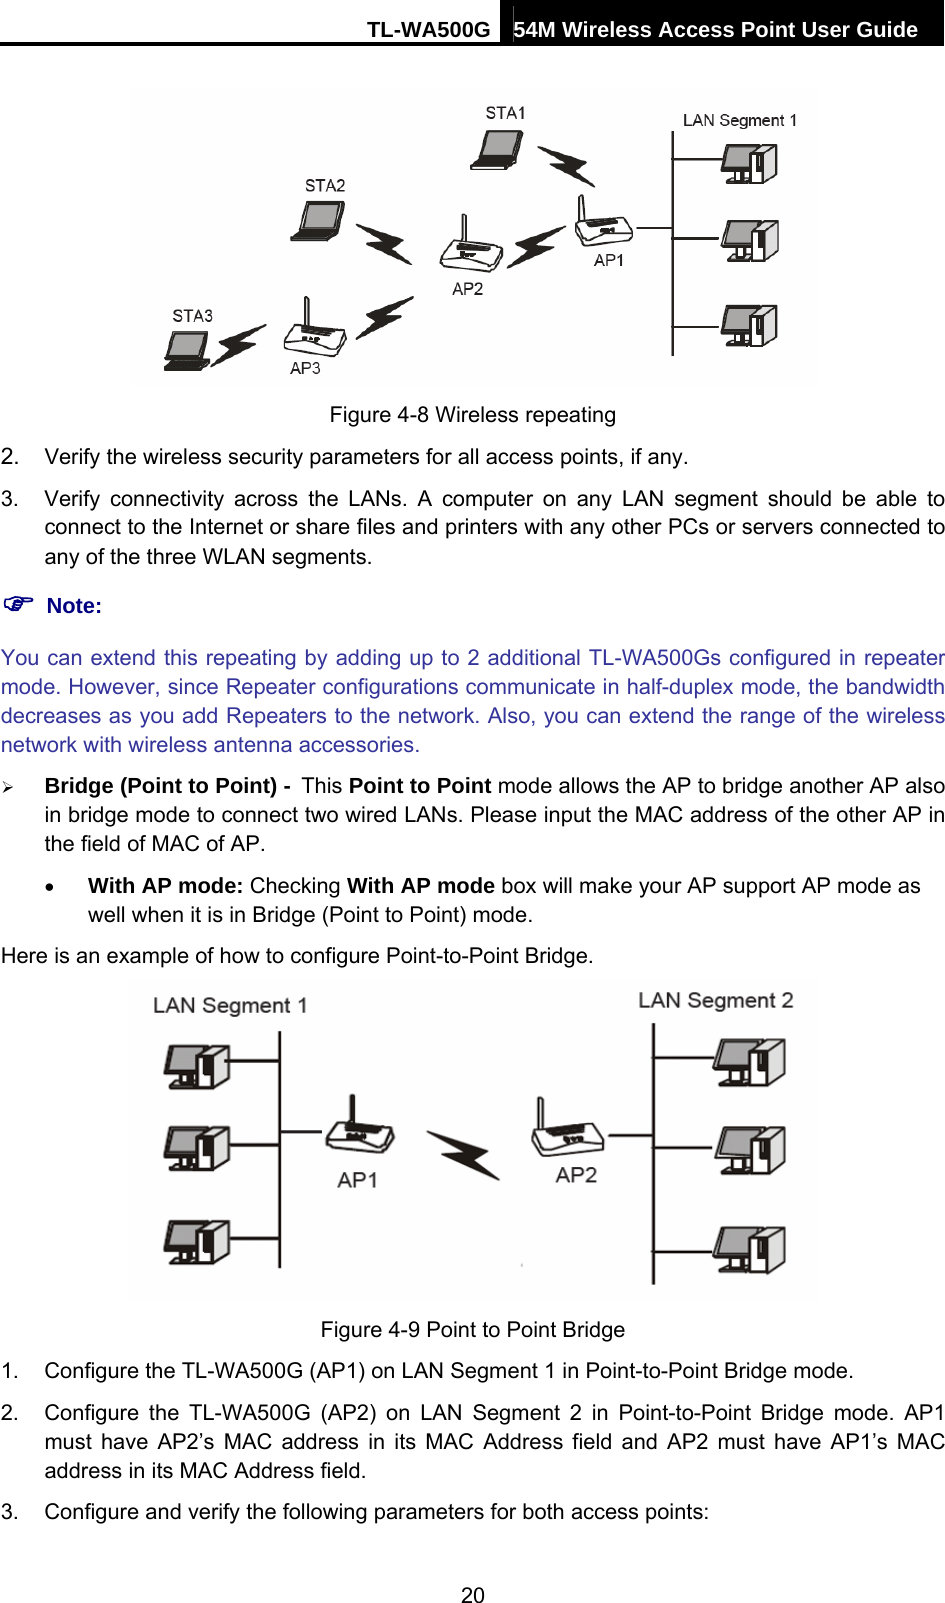 TL-WA500G 54M Wireless Access Point User Guide   Figure 4-8 Wireless repeating 2.  Verify the wireless security parameters for all access points, if any.   3.  Verify connectivity across the LANs. A computer on any LAN segment should be able to connect to the Internet or share files and printers with any other PCs or servers connected to any of the three WLAN segments. ) Note: You can extend this repeating by adding up to 2 additional TL-WA500Gs configured in repeater mode. However, since Repeater configurations communicate in half-duplex mode, the bandwidth decreases as you add Repeaters to the network. Also, you can extend the range of the wireless network with wireless antenna accessories. ¾ Bridge (Point to Point) - This Point to Point mode allows the AP to bridge another AP also in bridge mode to connect two wired LANs. Please input the MAC address of the other AP in the field of MAC of AP. • With AP mode: Checking With AP mode box will make your AP support AP mode as well when it is in Bridge (Point to Point) mode. Here is an example of how to configure Point-to-Point Bridge.  Figure 4-9 Point to Point Bridge 1.  Configure the TL-WA500G (AP1) on LAN Segment 1 in Point-to-Point Bridge mode.   2.  Configure the TL-WA500G (AP2) on LAN Segment 2 in Point-to-Point Bridge mode. AP1 must have AP2’s MAC address in its MAC Address field and AP2 must have AP1’s MAC address in its MAC Address field. 3.  Configure and verify the following parameters for both access points:   20 